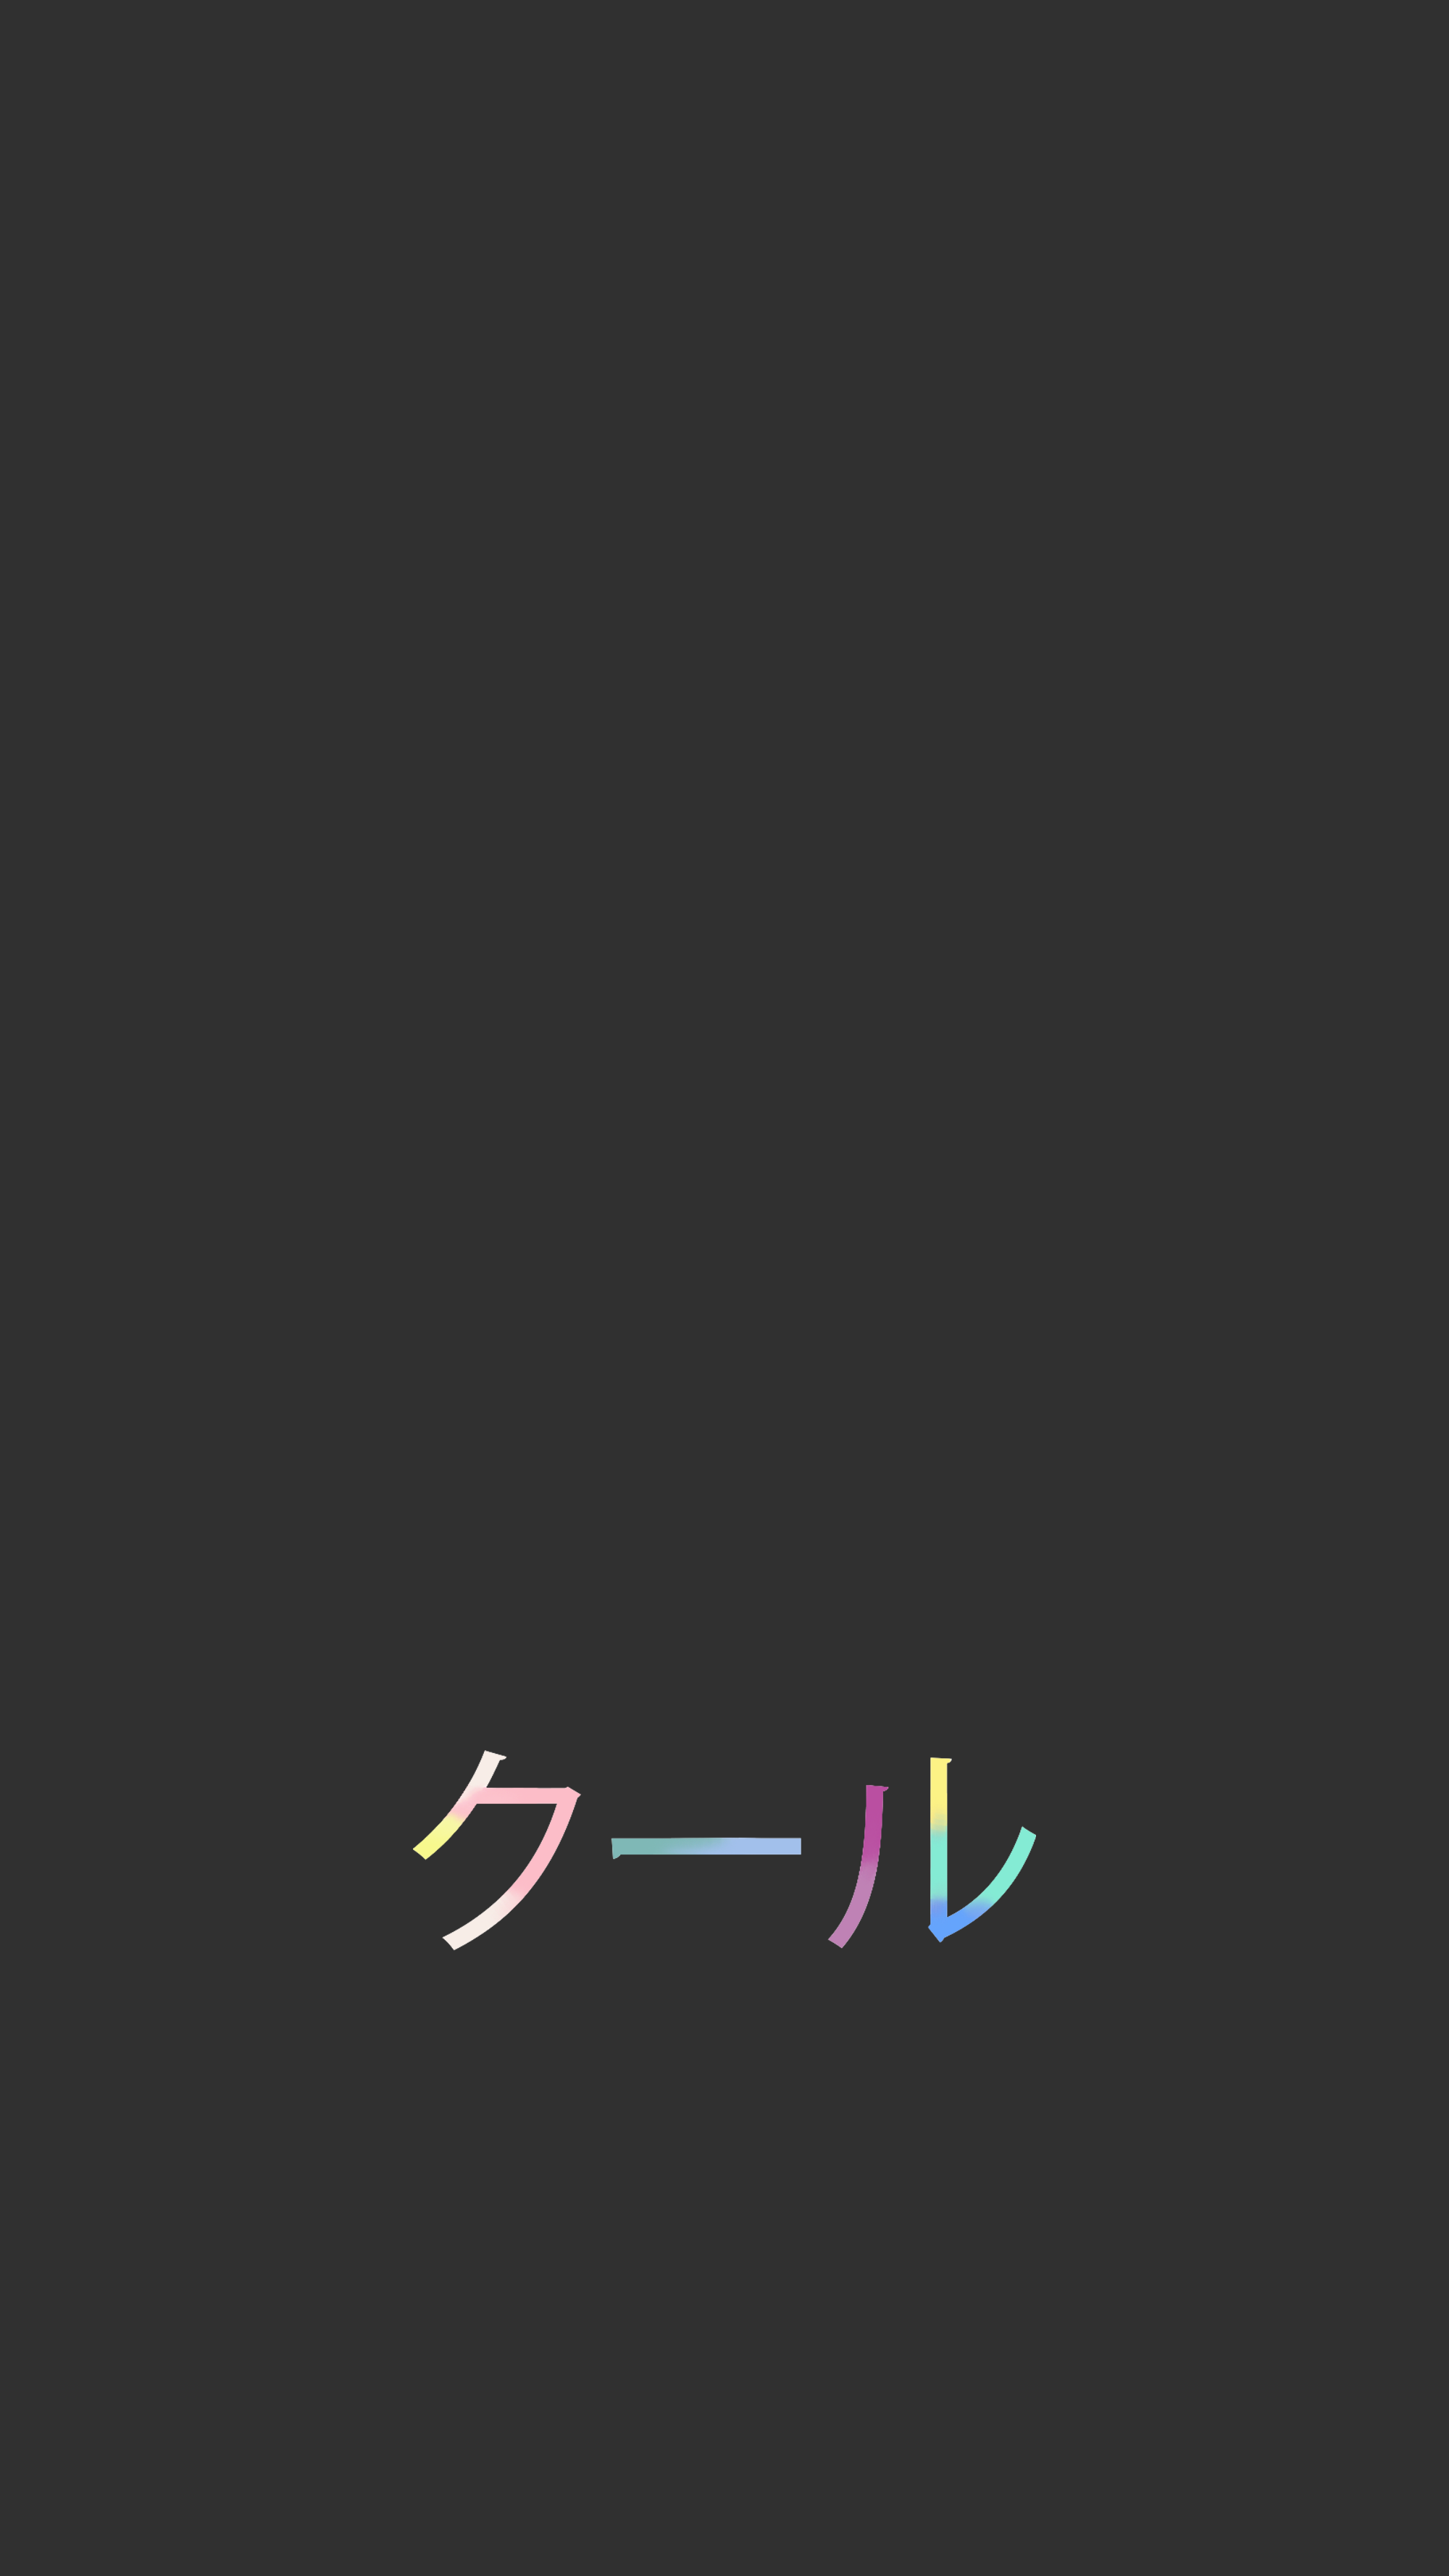 Aesthetic Phone Wallpapers Japanese